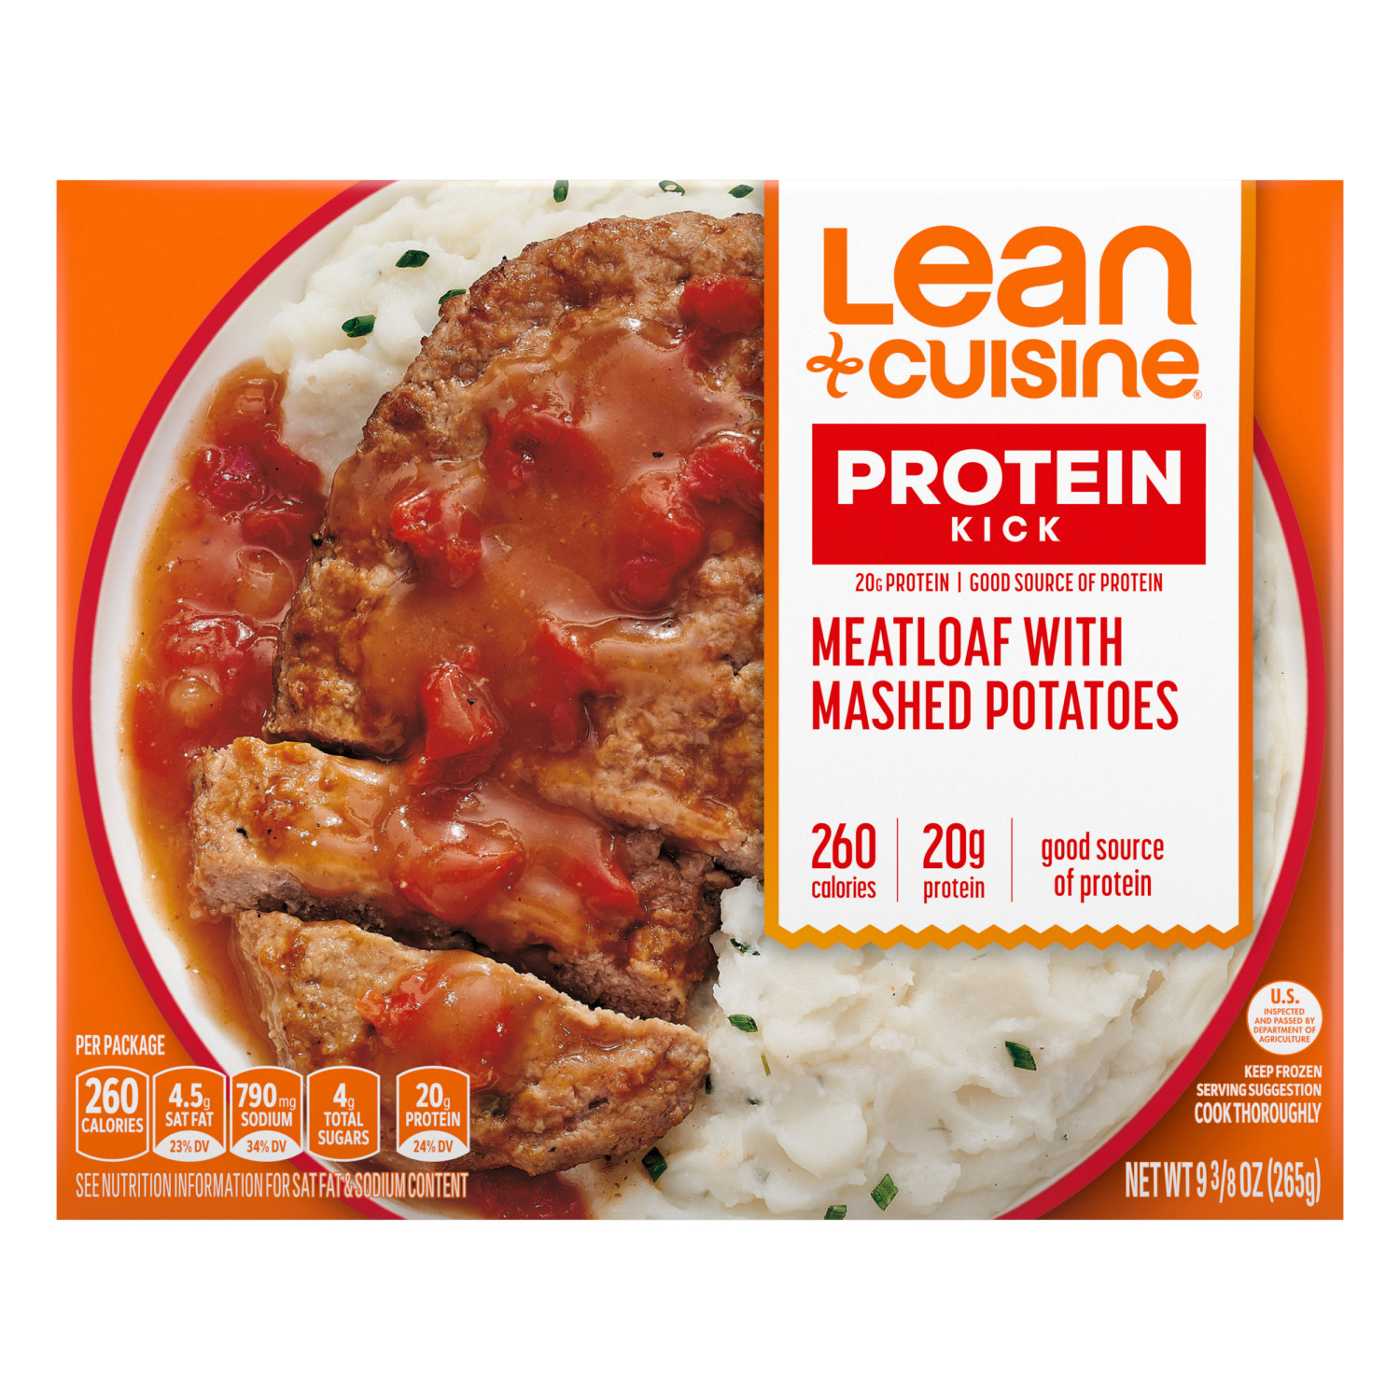 Lean Cuisine 21g Protein Meatloaf & Mashed Potatoes Frozen Meal; image 1 of 4